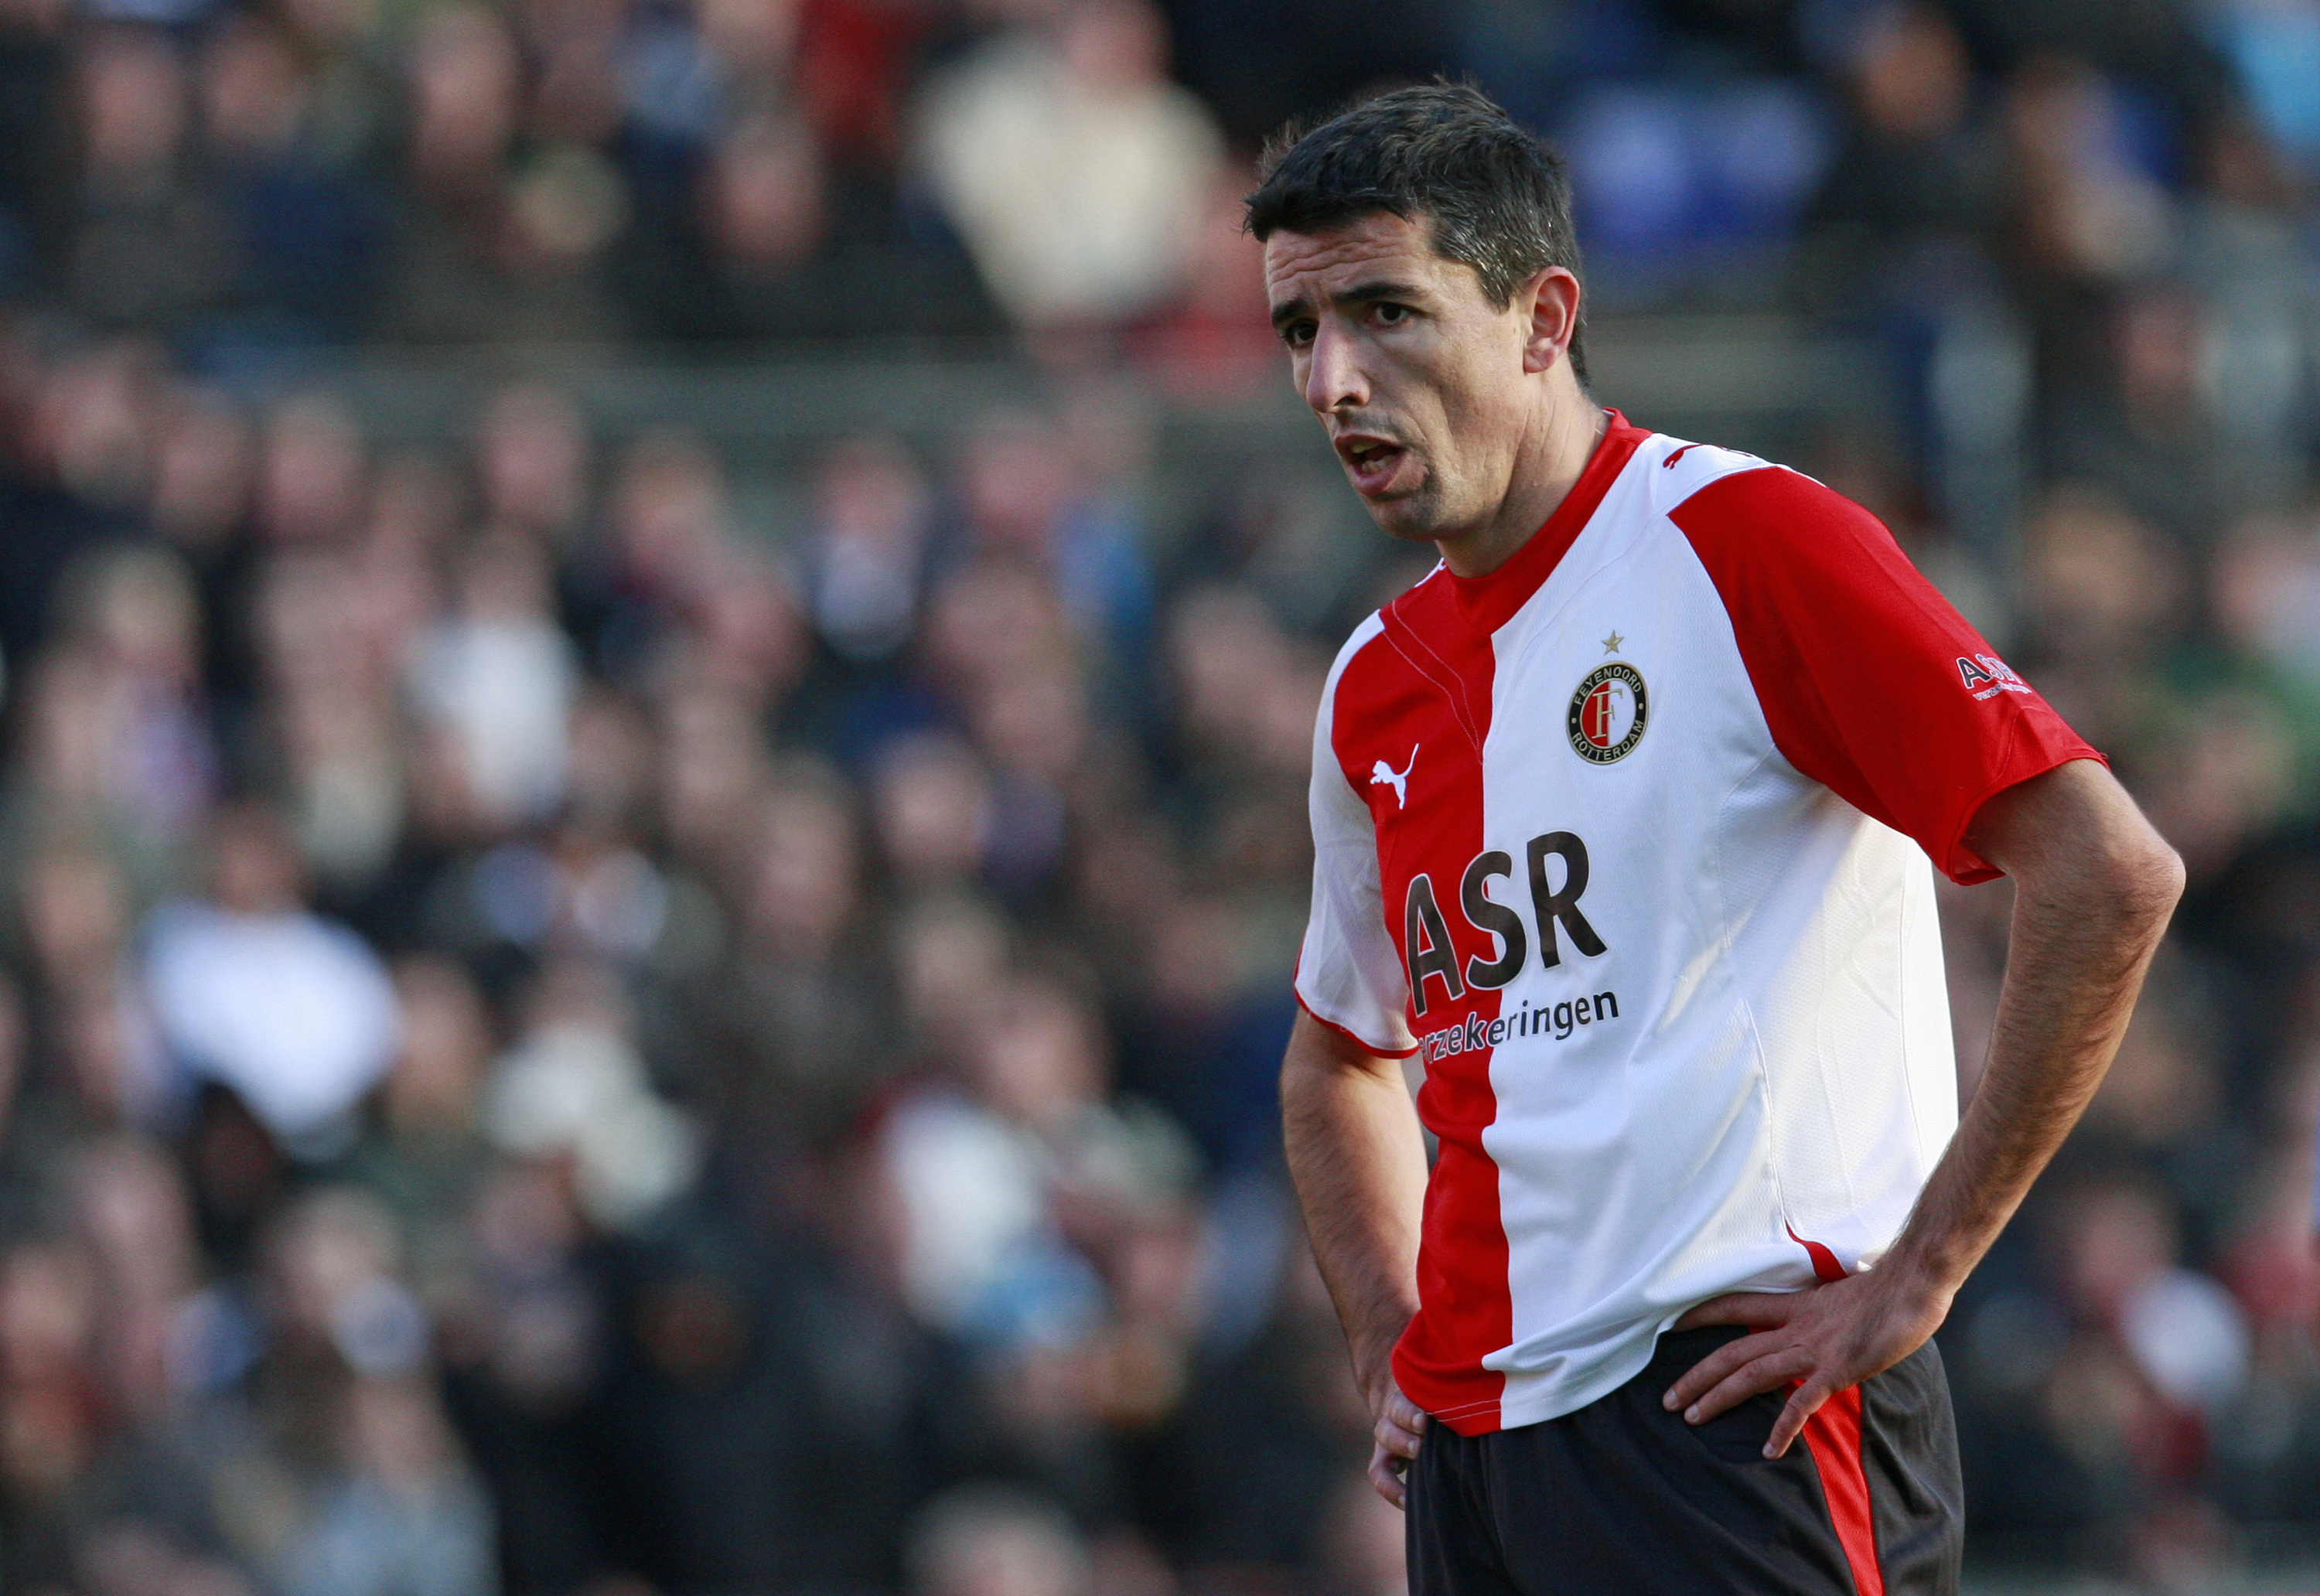 ROTTERDAM, NETHERLANDS - NOVEMBER 22:  Roy Makaay of Feyenoord during the Eredivisie match between Feyenoord and FC Utrecht held on November 22, 2009 at the Feijenoord 'De Kuip' Stadion, in Rotterdam, Netherlands. The match ended in a 0-0 draw. (Photo by